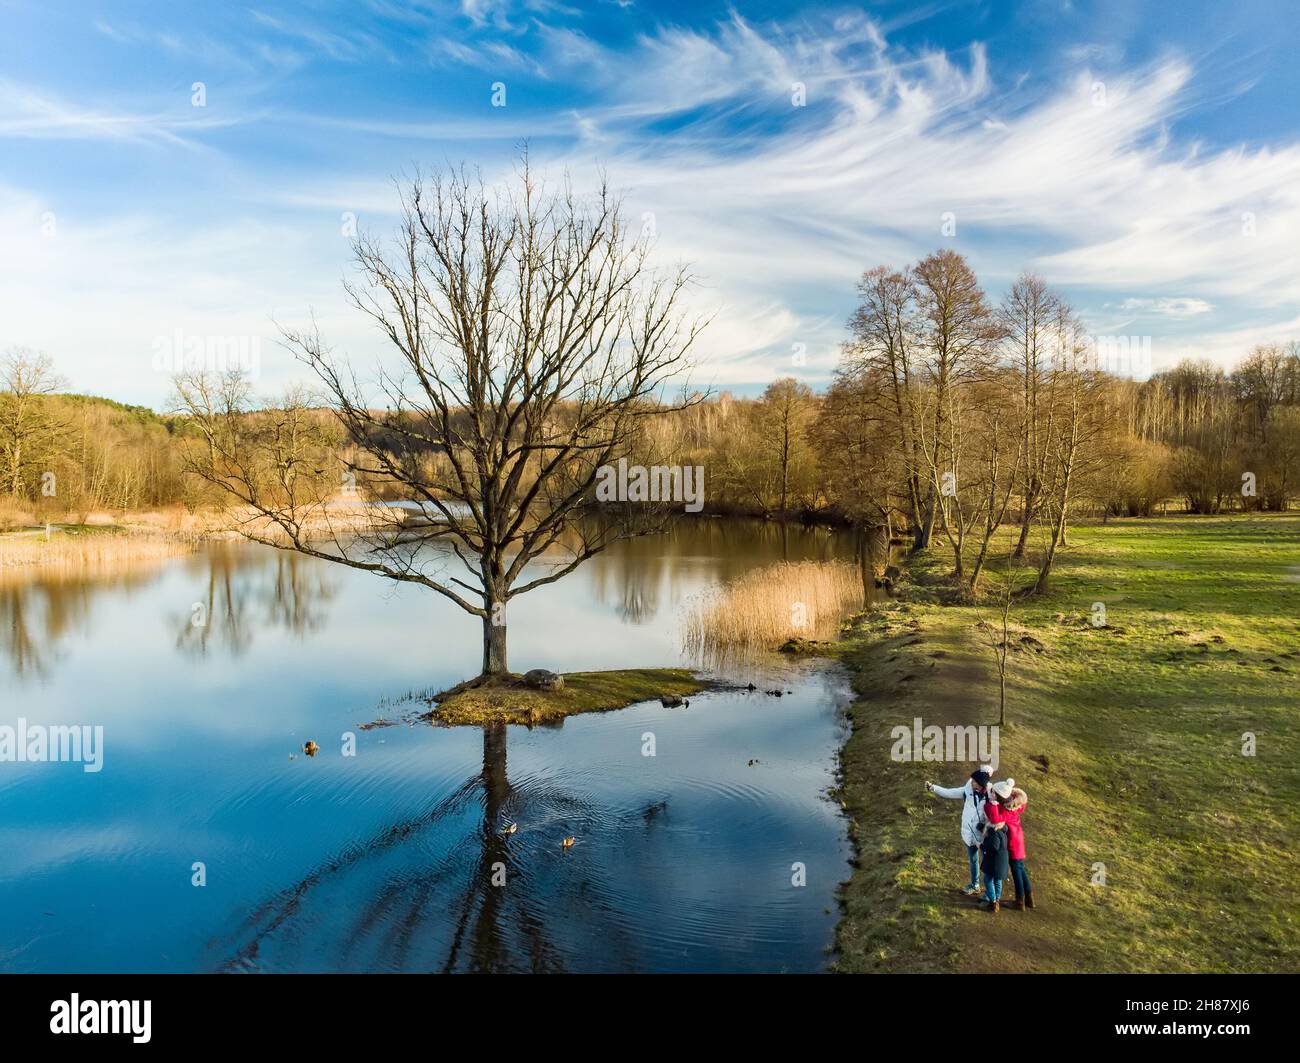 Aerial view of Mother and her kids having fun by a lake or pond on sunny spring day. Family having quality time together outdoors. Exploring nature wi Stock Photo